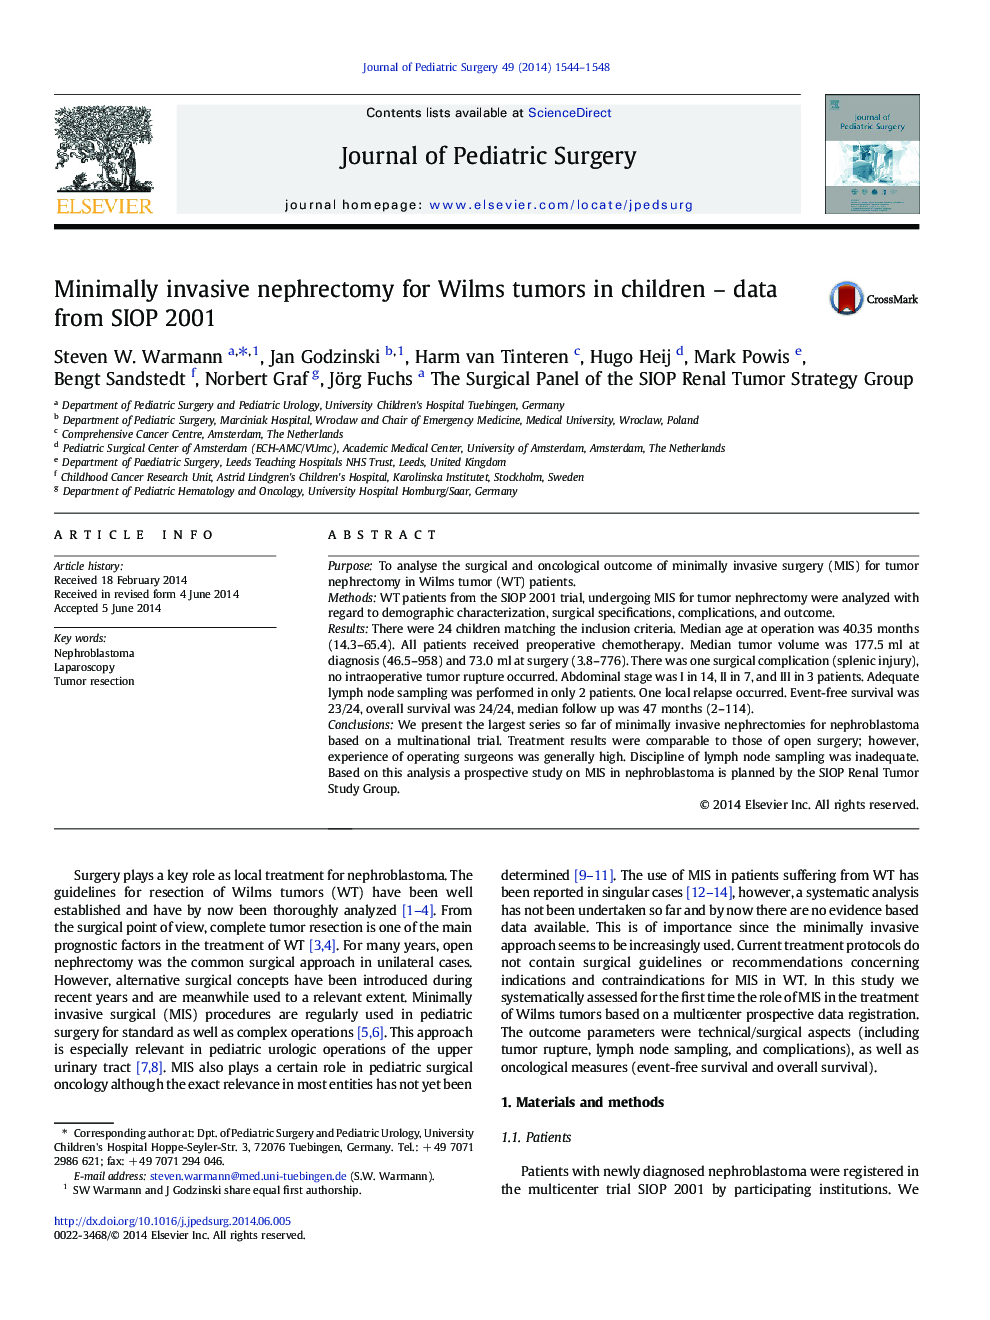 Minimally invasive nephrectomy for Wilms tumors in children – data from SIOP 2001